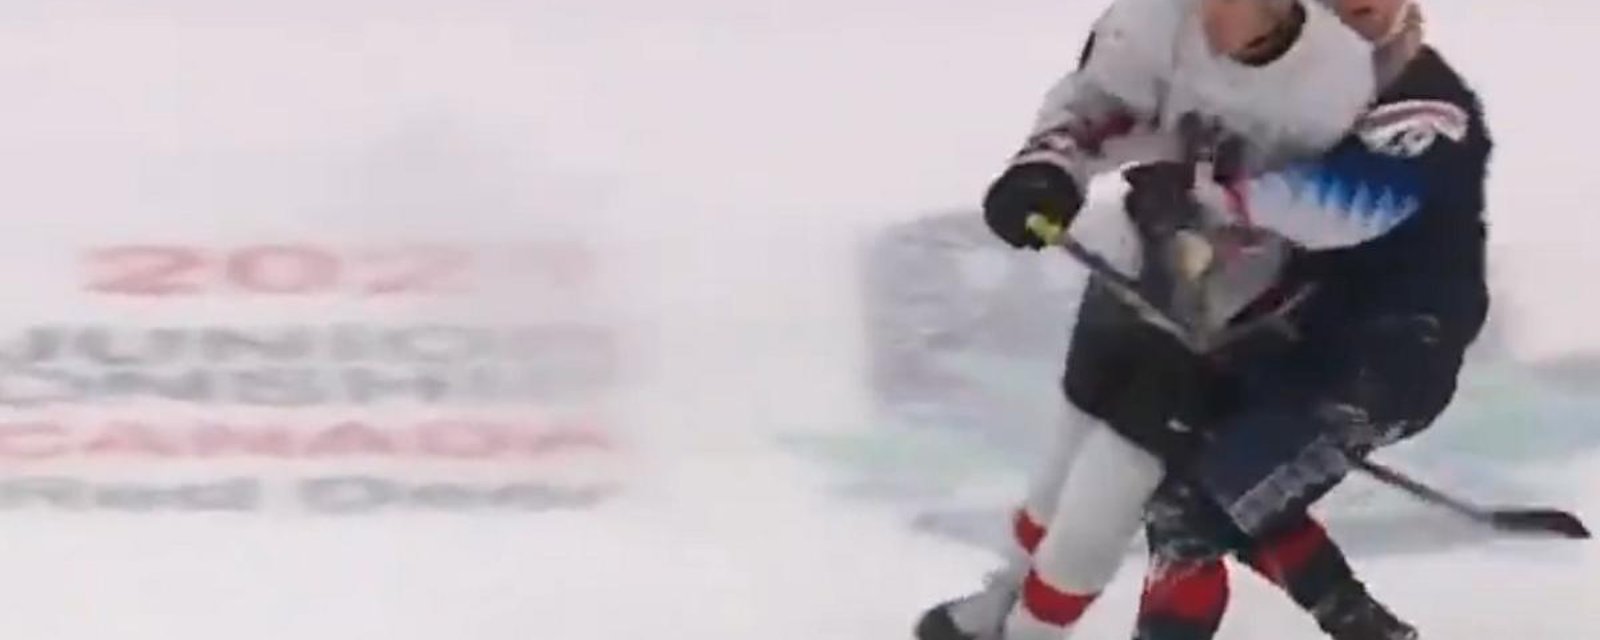 Austria's Philipp Wimmer to face discipline for brutal hit to the head at the World Juniors.